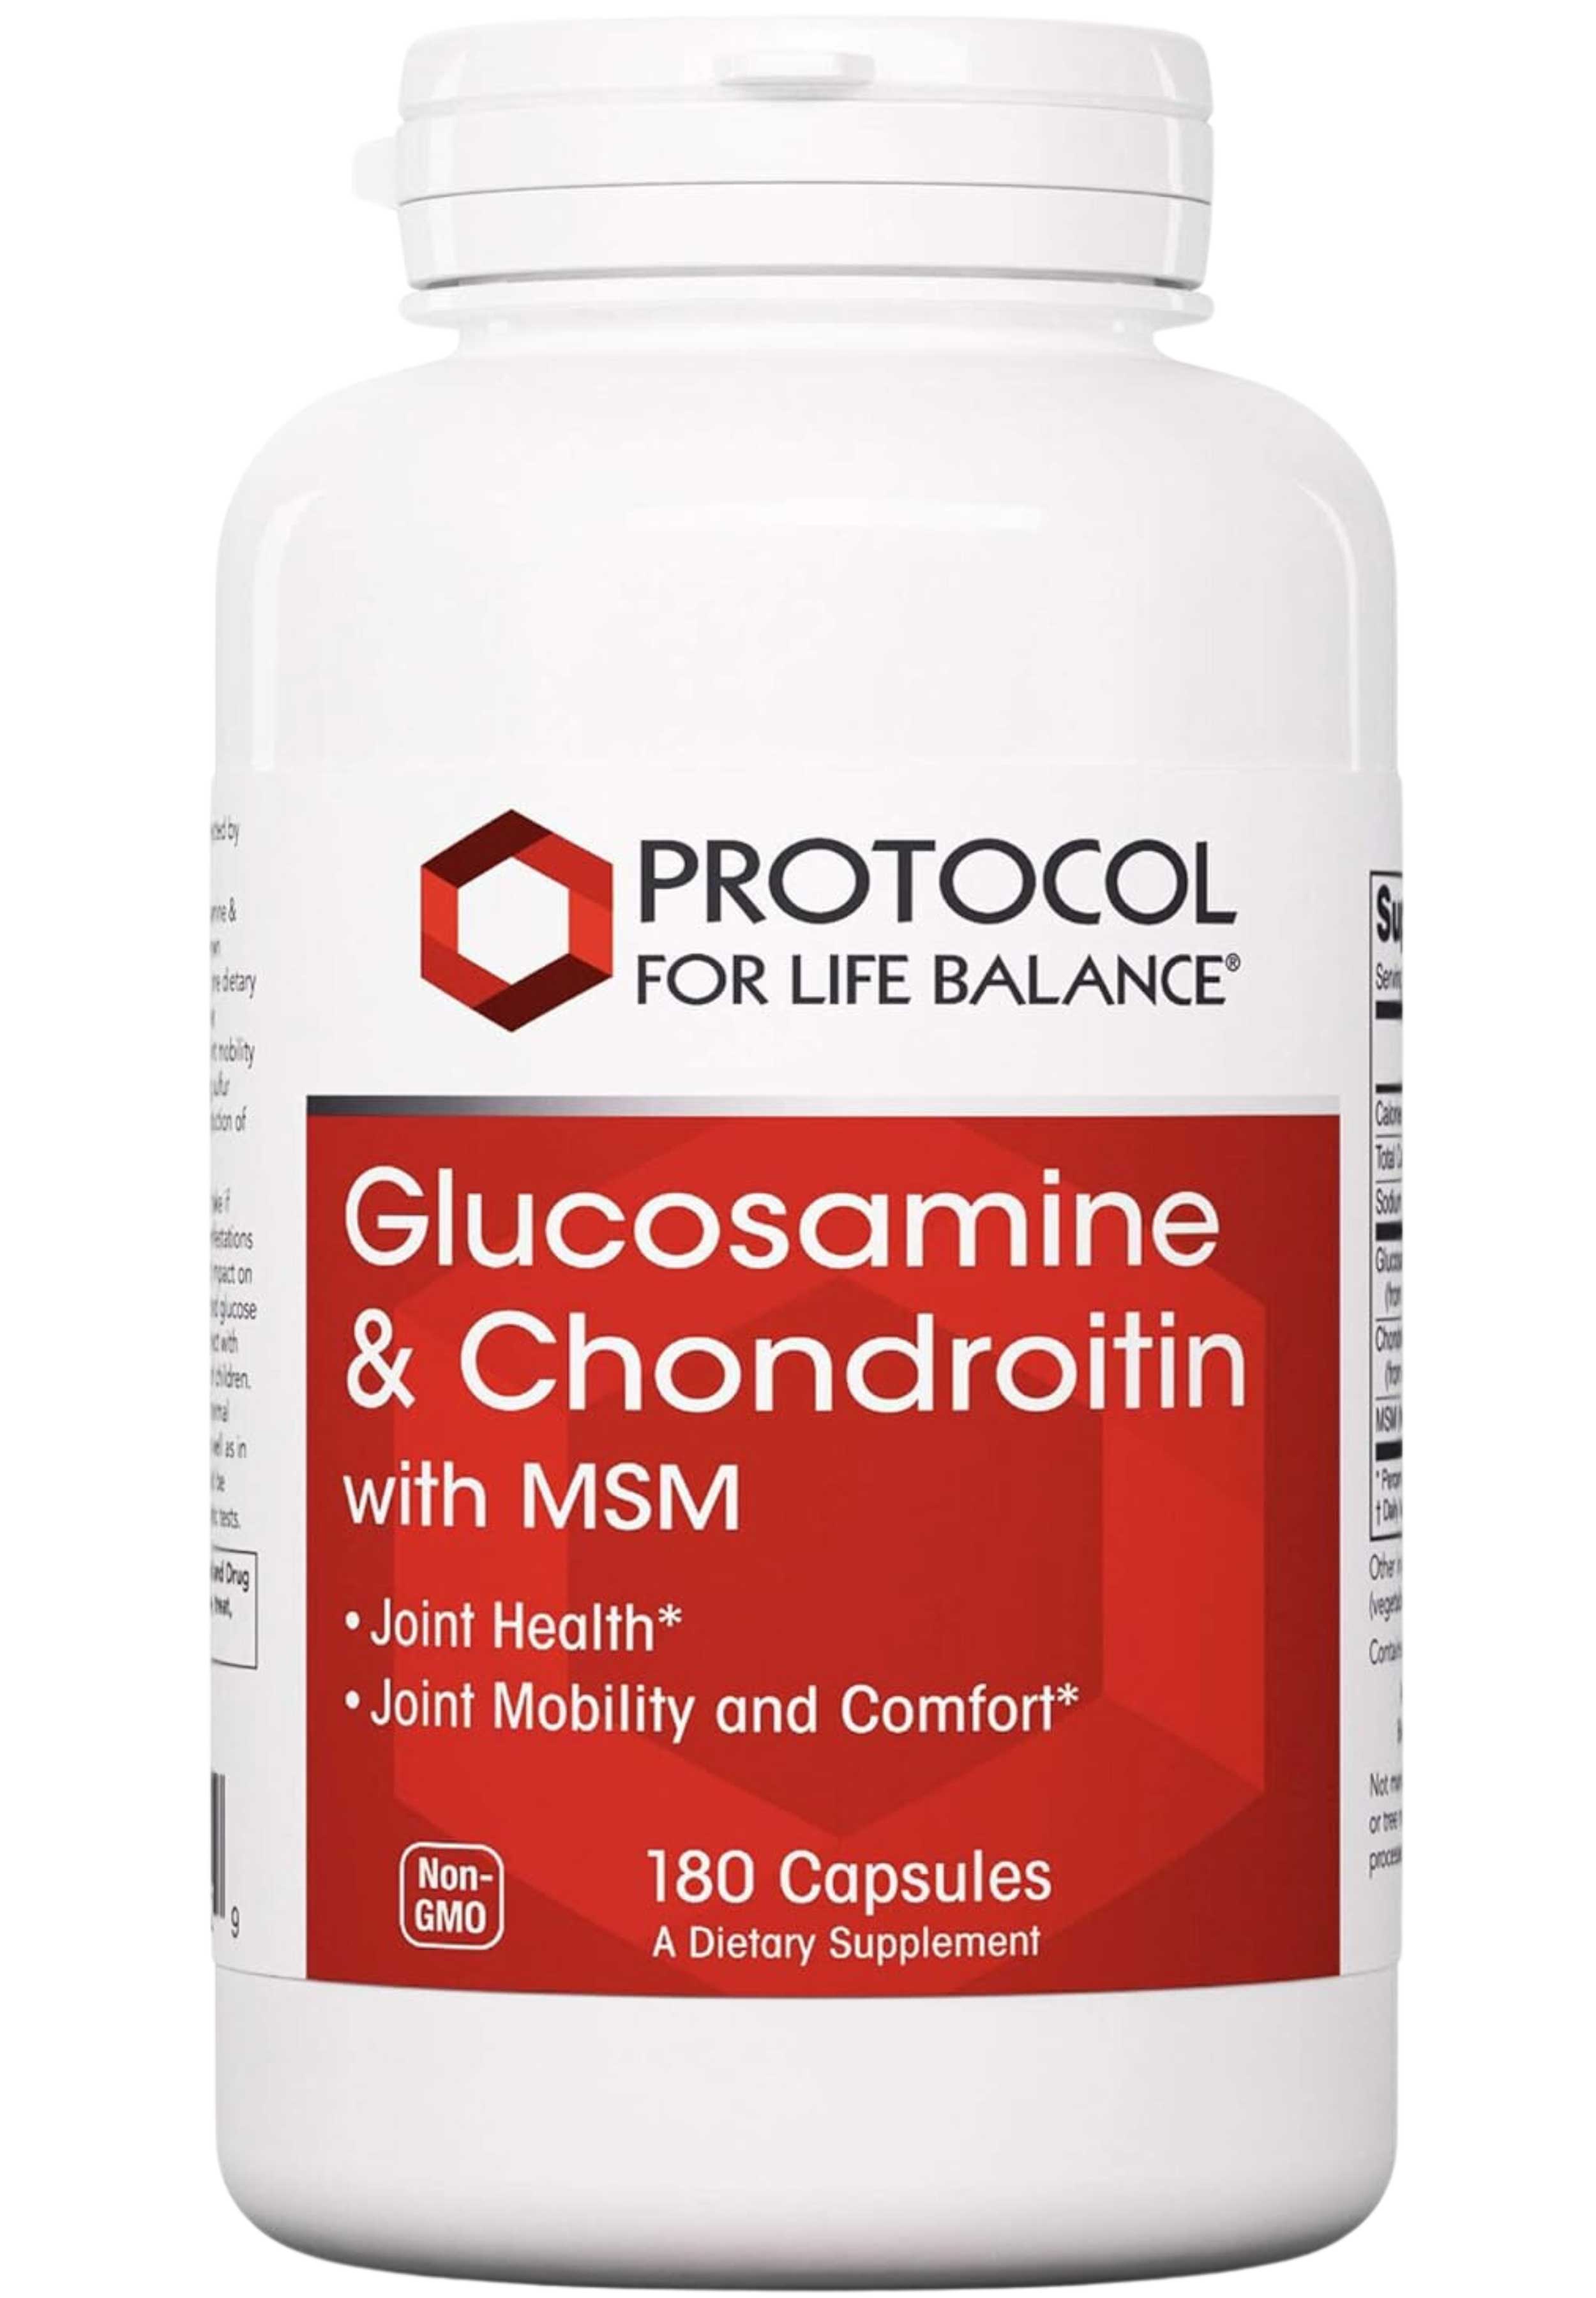 Protocol for Life Balance Glucosamine & Chondroitin with MSM